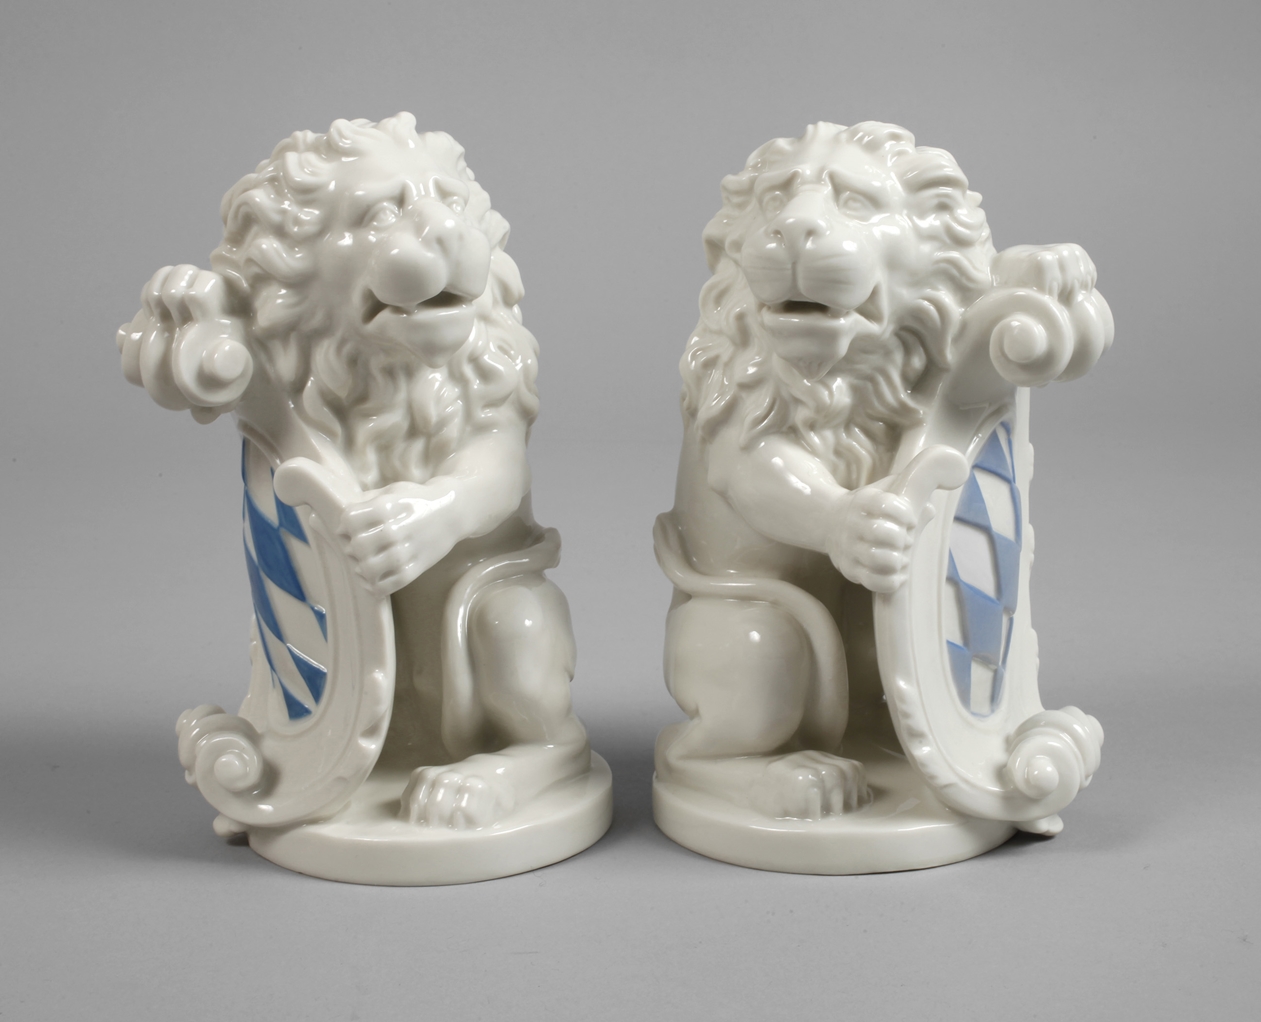 Nymphenburg pair "Lion with (Bavarian) coat of arms"